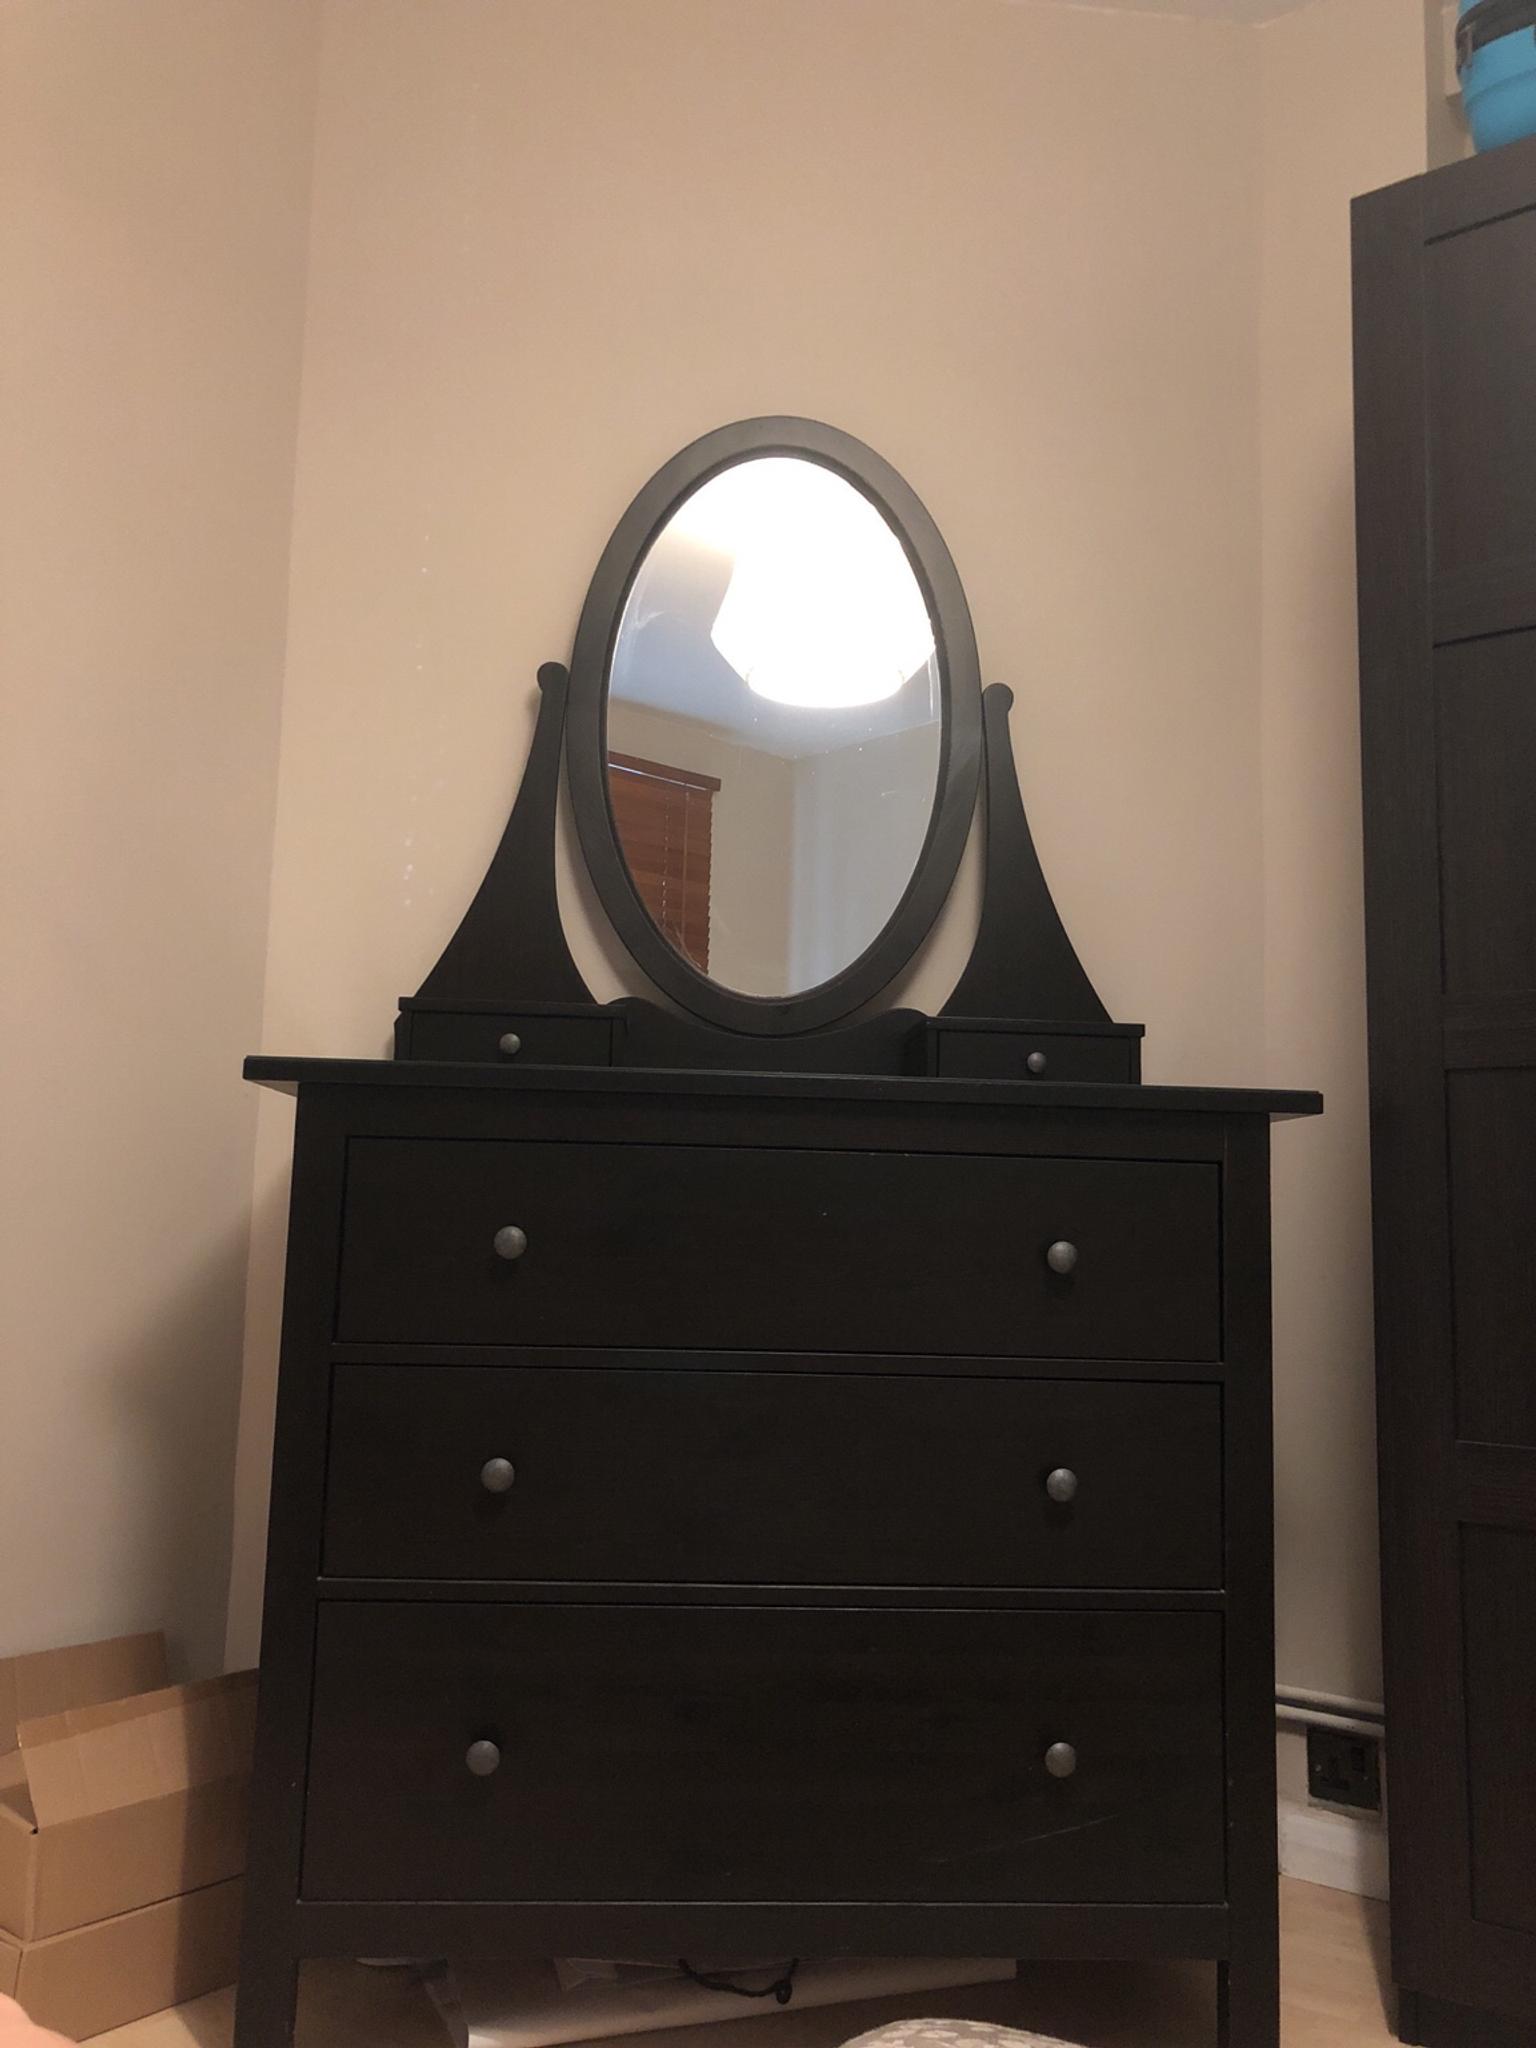 Ikea Hemnes Chest Of Drawers With Mirror In Se1 London Fur 120 00